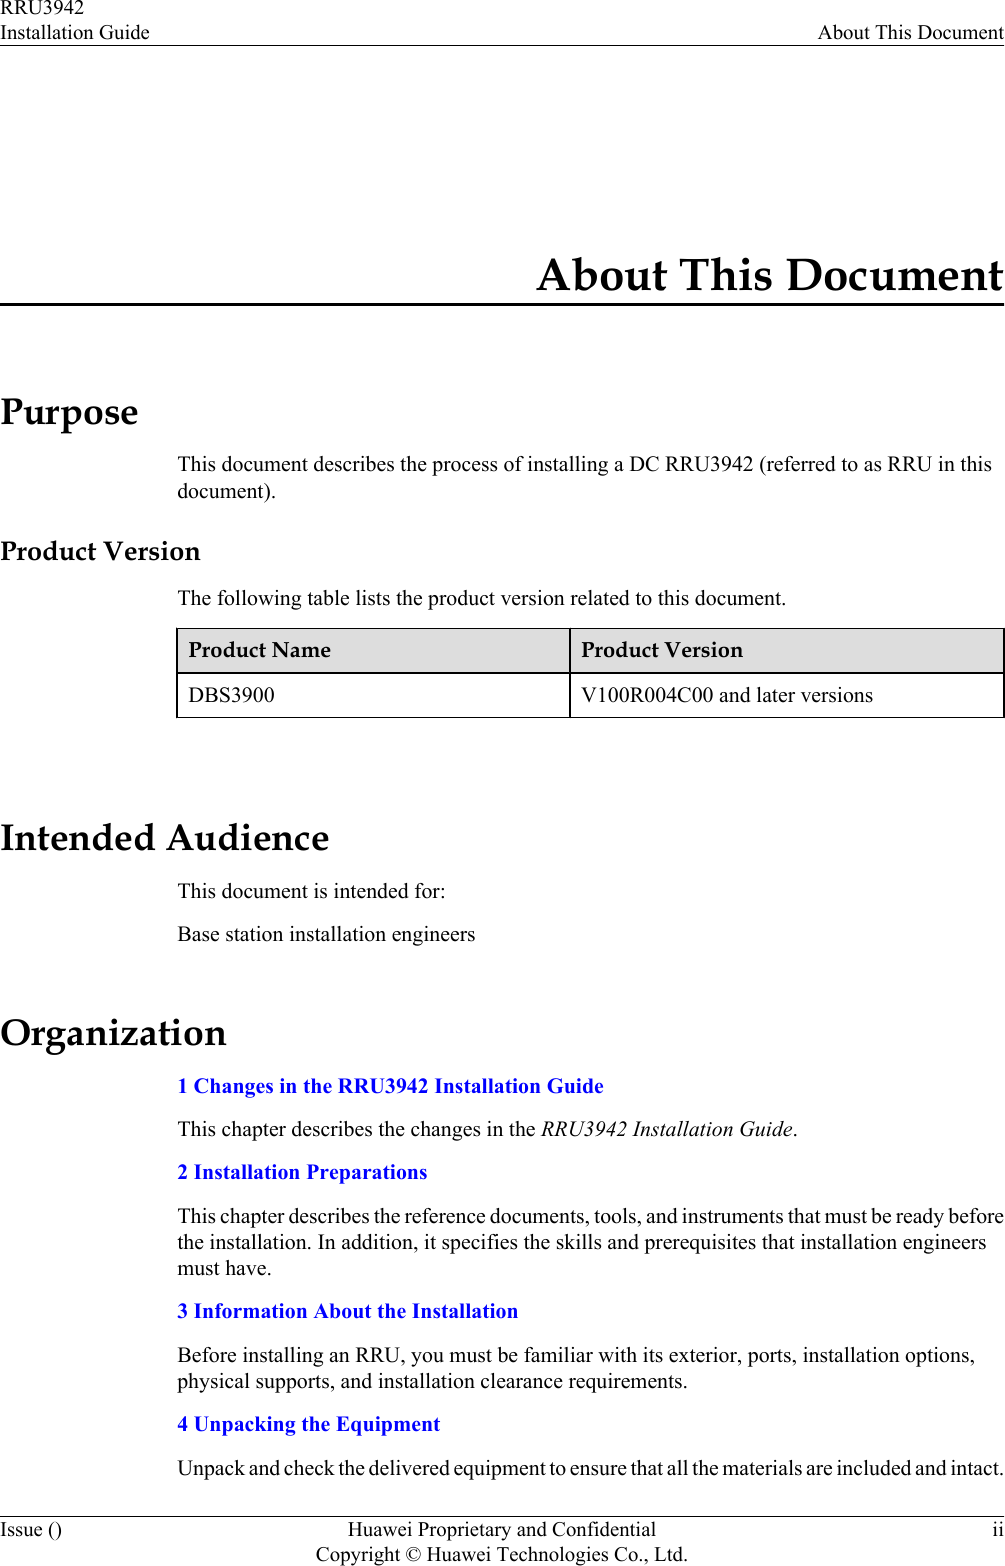 About This DocumentPurposeThis document describes the process of installing a DC RRU3942 (referred to as RRU in thisdocument).Product VersionThe following table lists the product version related to this document.Product Name Product VersionDBS3900 V100R004C00 and later versions Intended AudienceThis document is intended for:Base station installation engineersOrganization1 Changes in the RRU3942 Installation GuideThis chapter describes the changes in the RRU3942 Installation Guide.2 Installation PreparationsThis chapter describes the reference documents, tools, and instruments that must be ready beforethe installation. In addition, it specifies the skills and prerequisites that installation engineersmust have.3 Information About the InstallationBefore installing an RRU, you must be familiar with its exterior, ports, installation options,physical supports, and installation clearance requirements.4 Unpacking the EquipmentUnpack and check the delivered equipment to ensure that all the materials are included and intact.RRU3942Installation Guide About This DocumentIssue () Huawei Proprietary and ConfidentialCopyright © Huawei Technologies Co., Ltd.ii